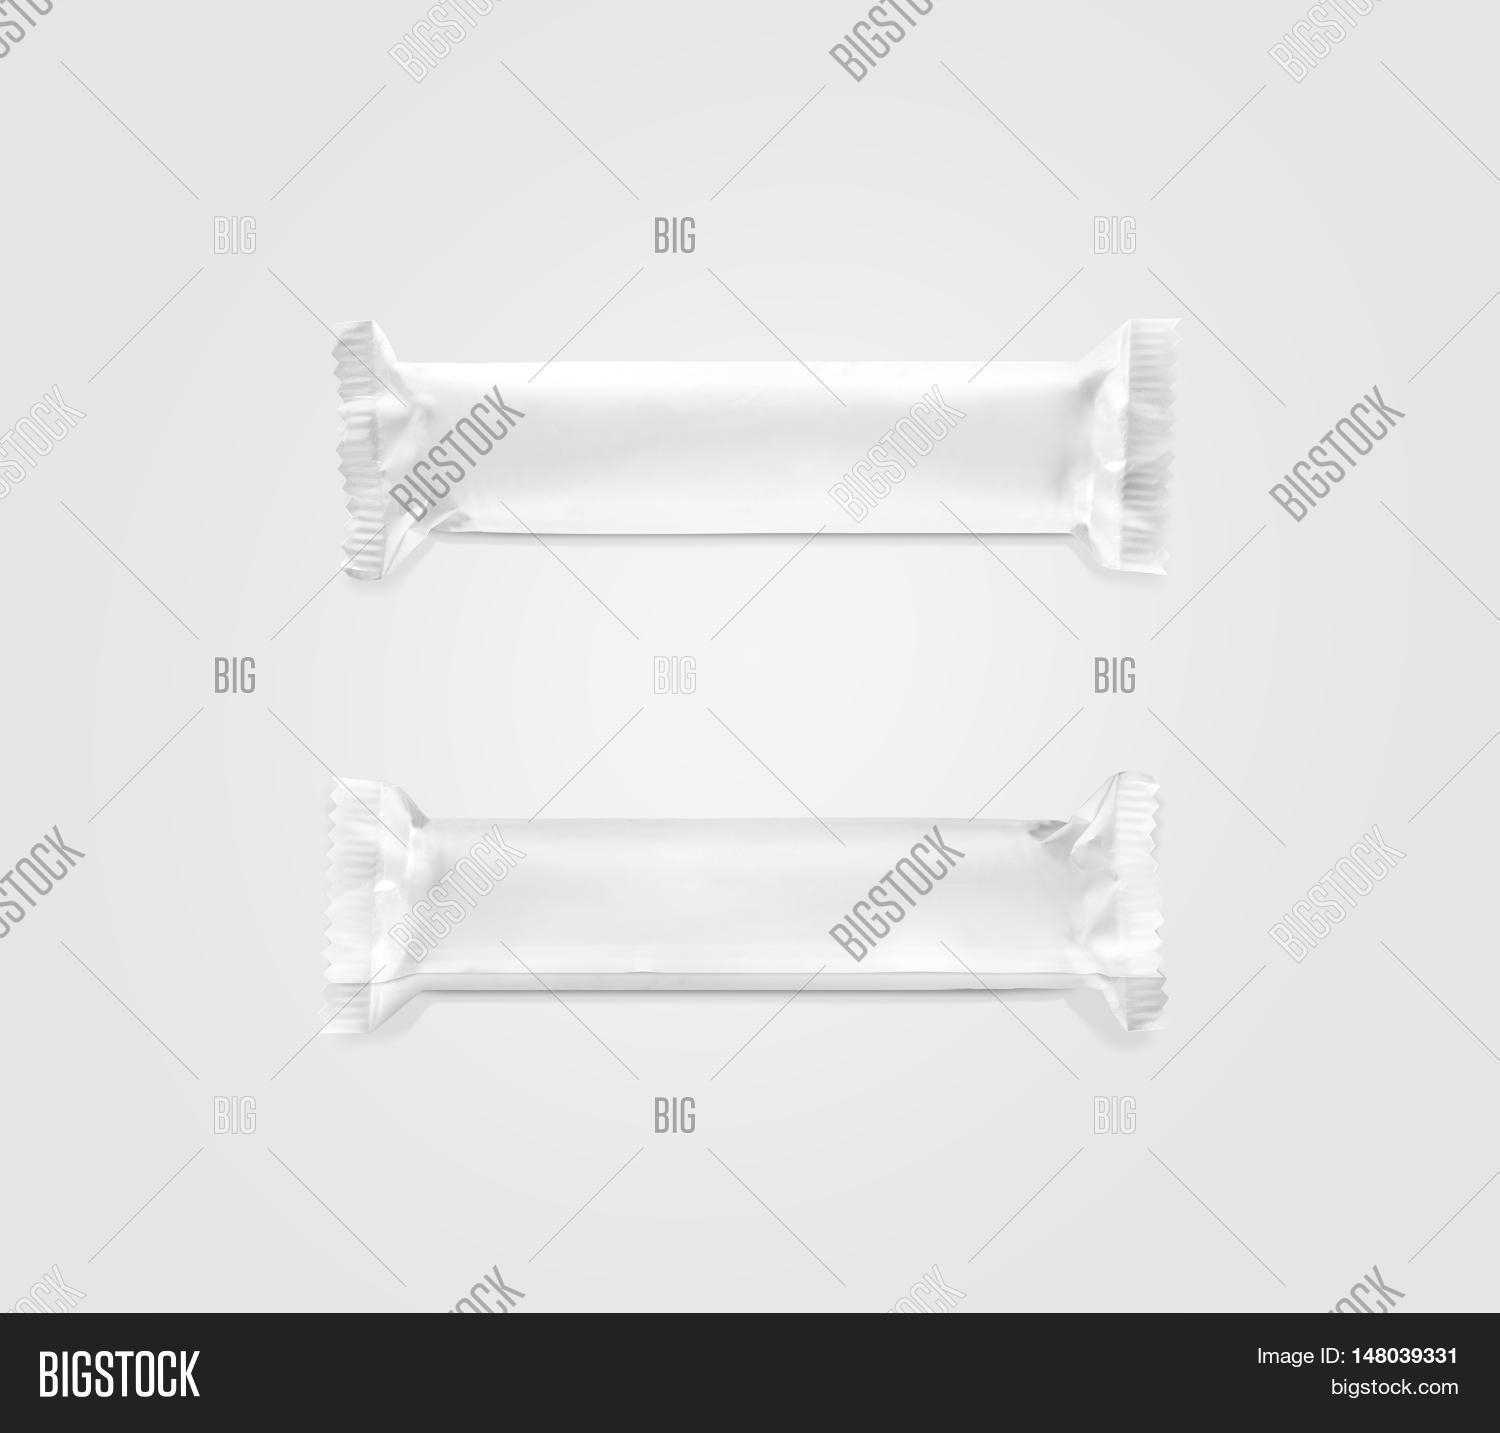 Blank White Candy Bar Image & Photo (Free Trial) | Bigstock Intended For Free Blank Candy Bar Wrapper Template